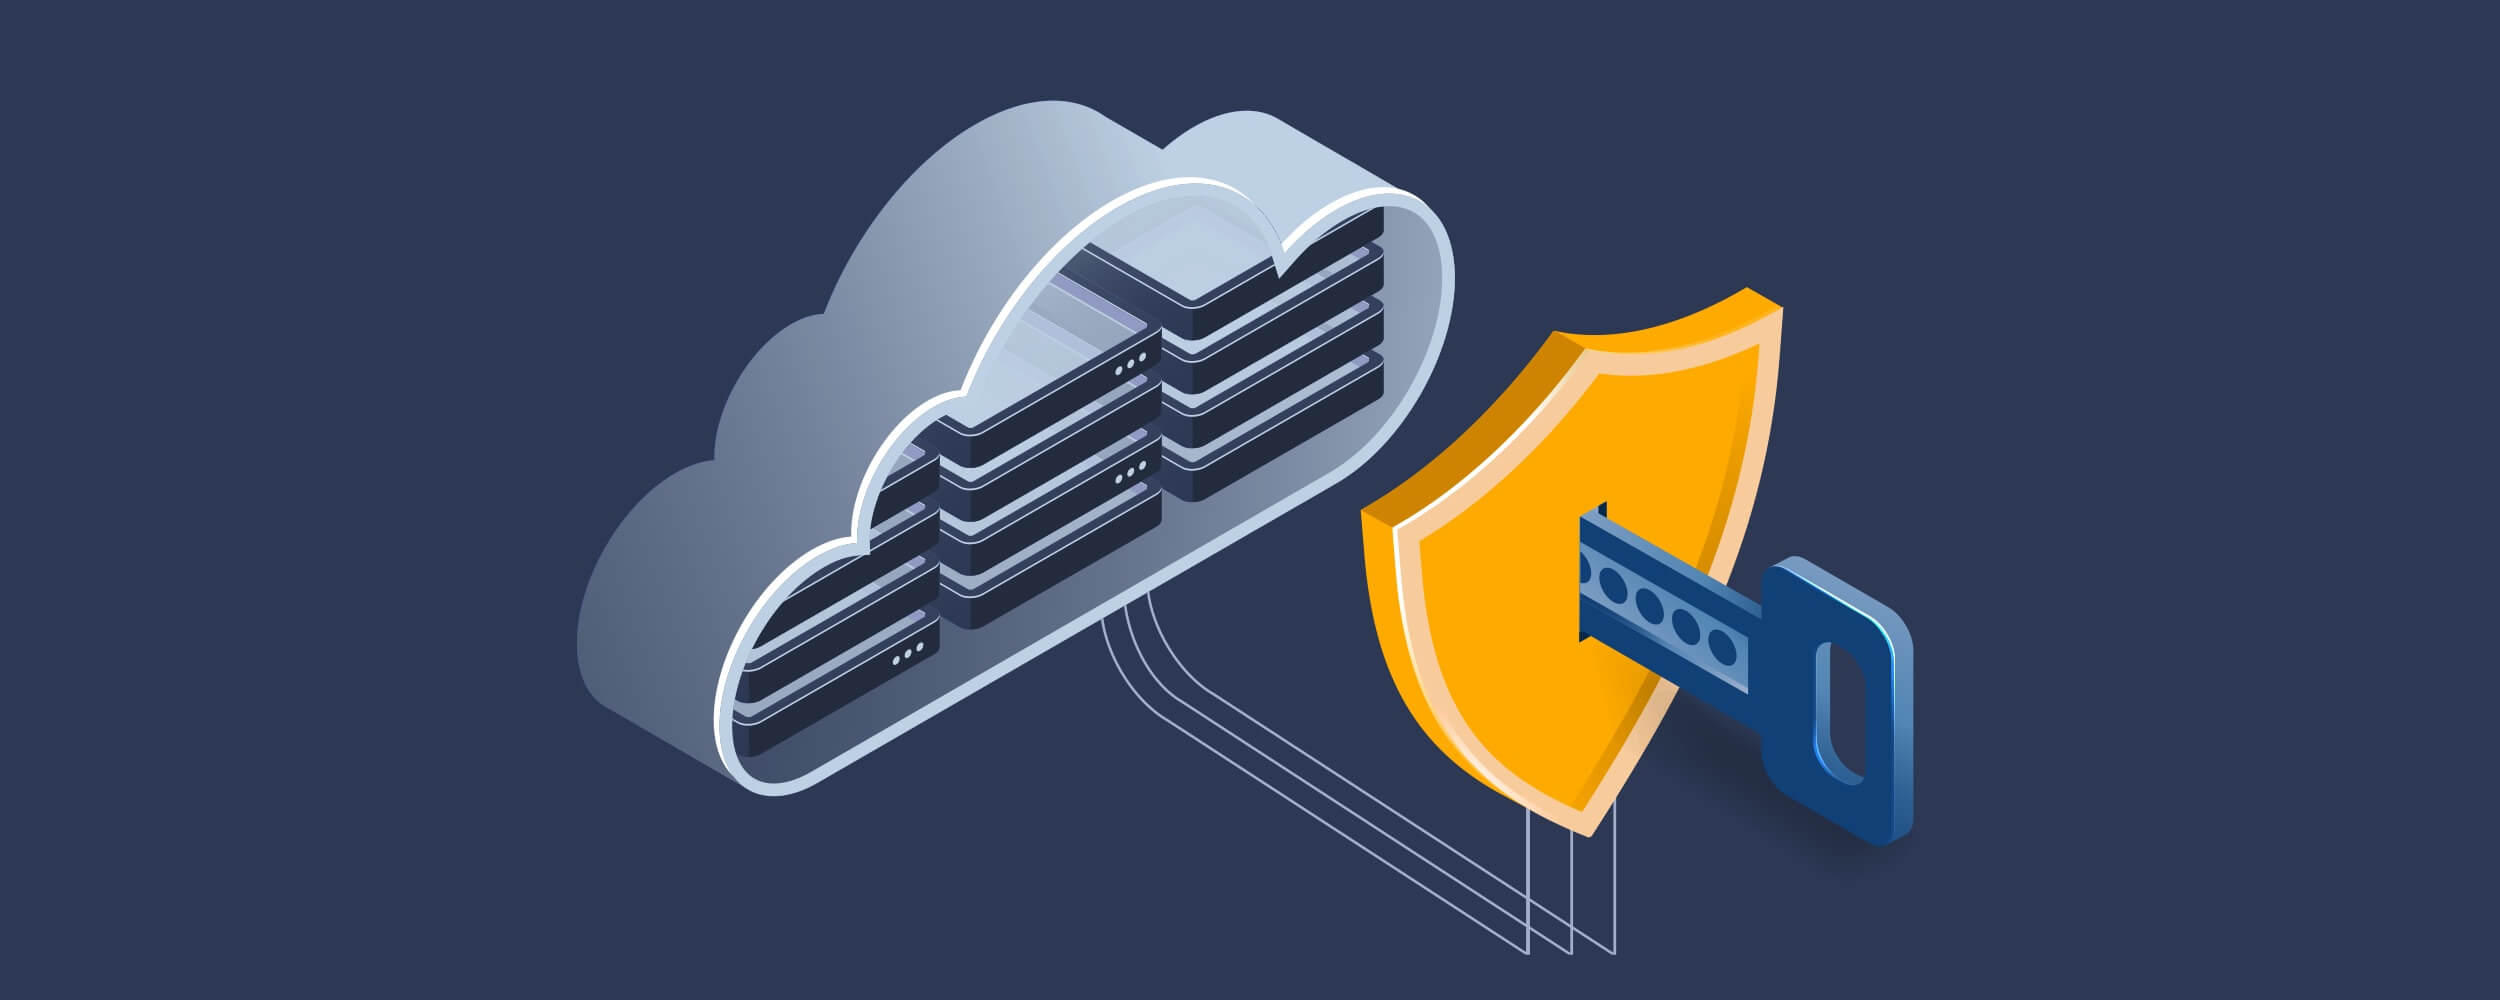 Securing your Windows File Servers. Part 2 | Cygna Labs Blog